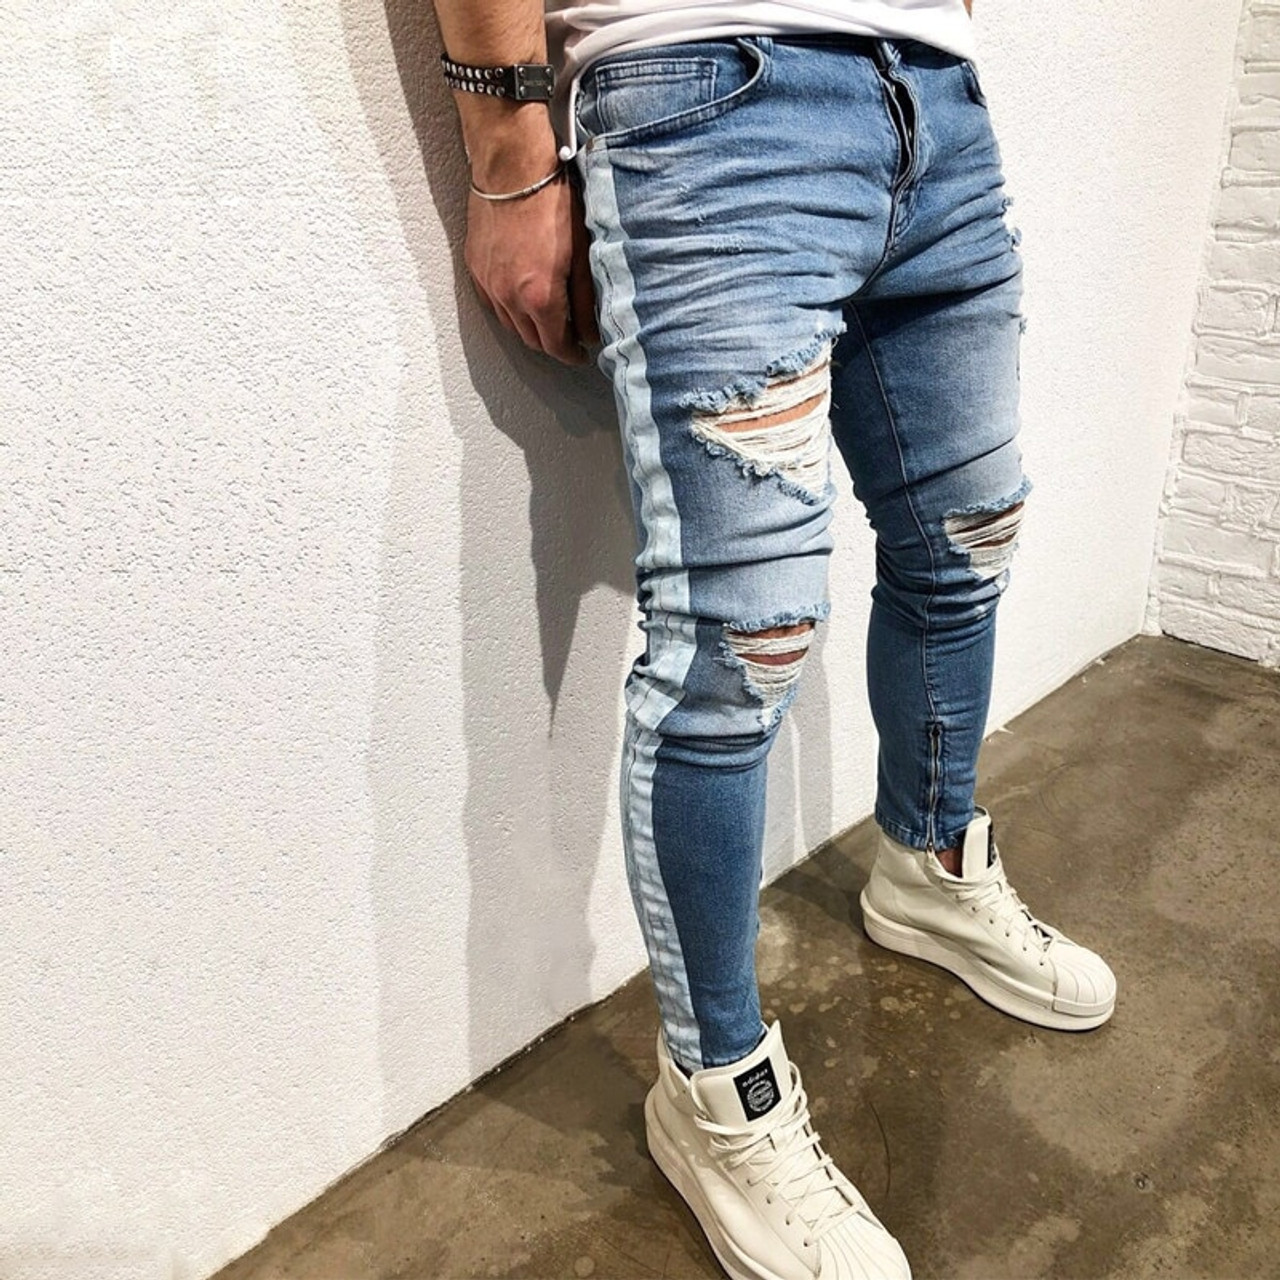 Streetwear Mens Jeans Fashion Casual Knee Hole Elasticity Pencil Pants  Trend Cool High Street Ripped Skinny Jeans Black Jeans - AliExpress